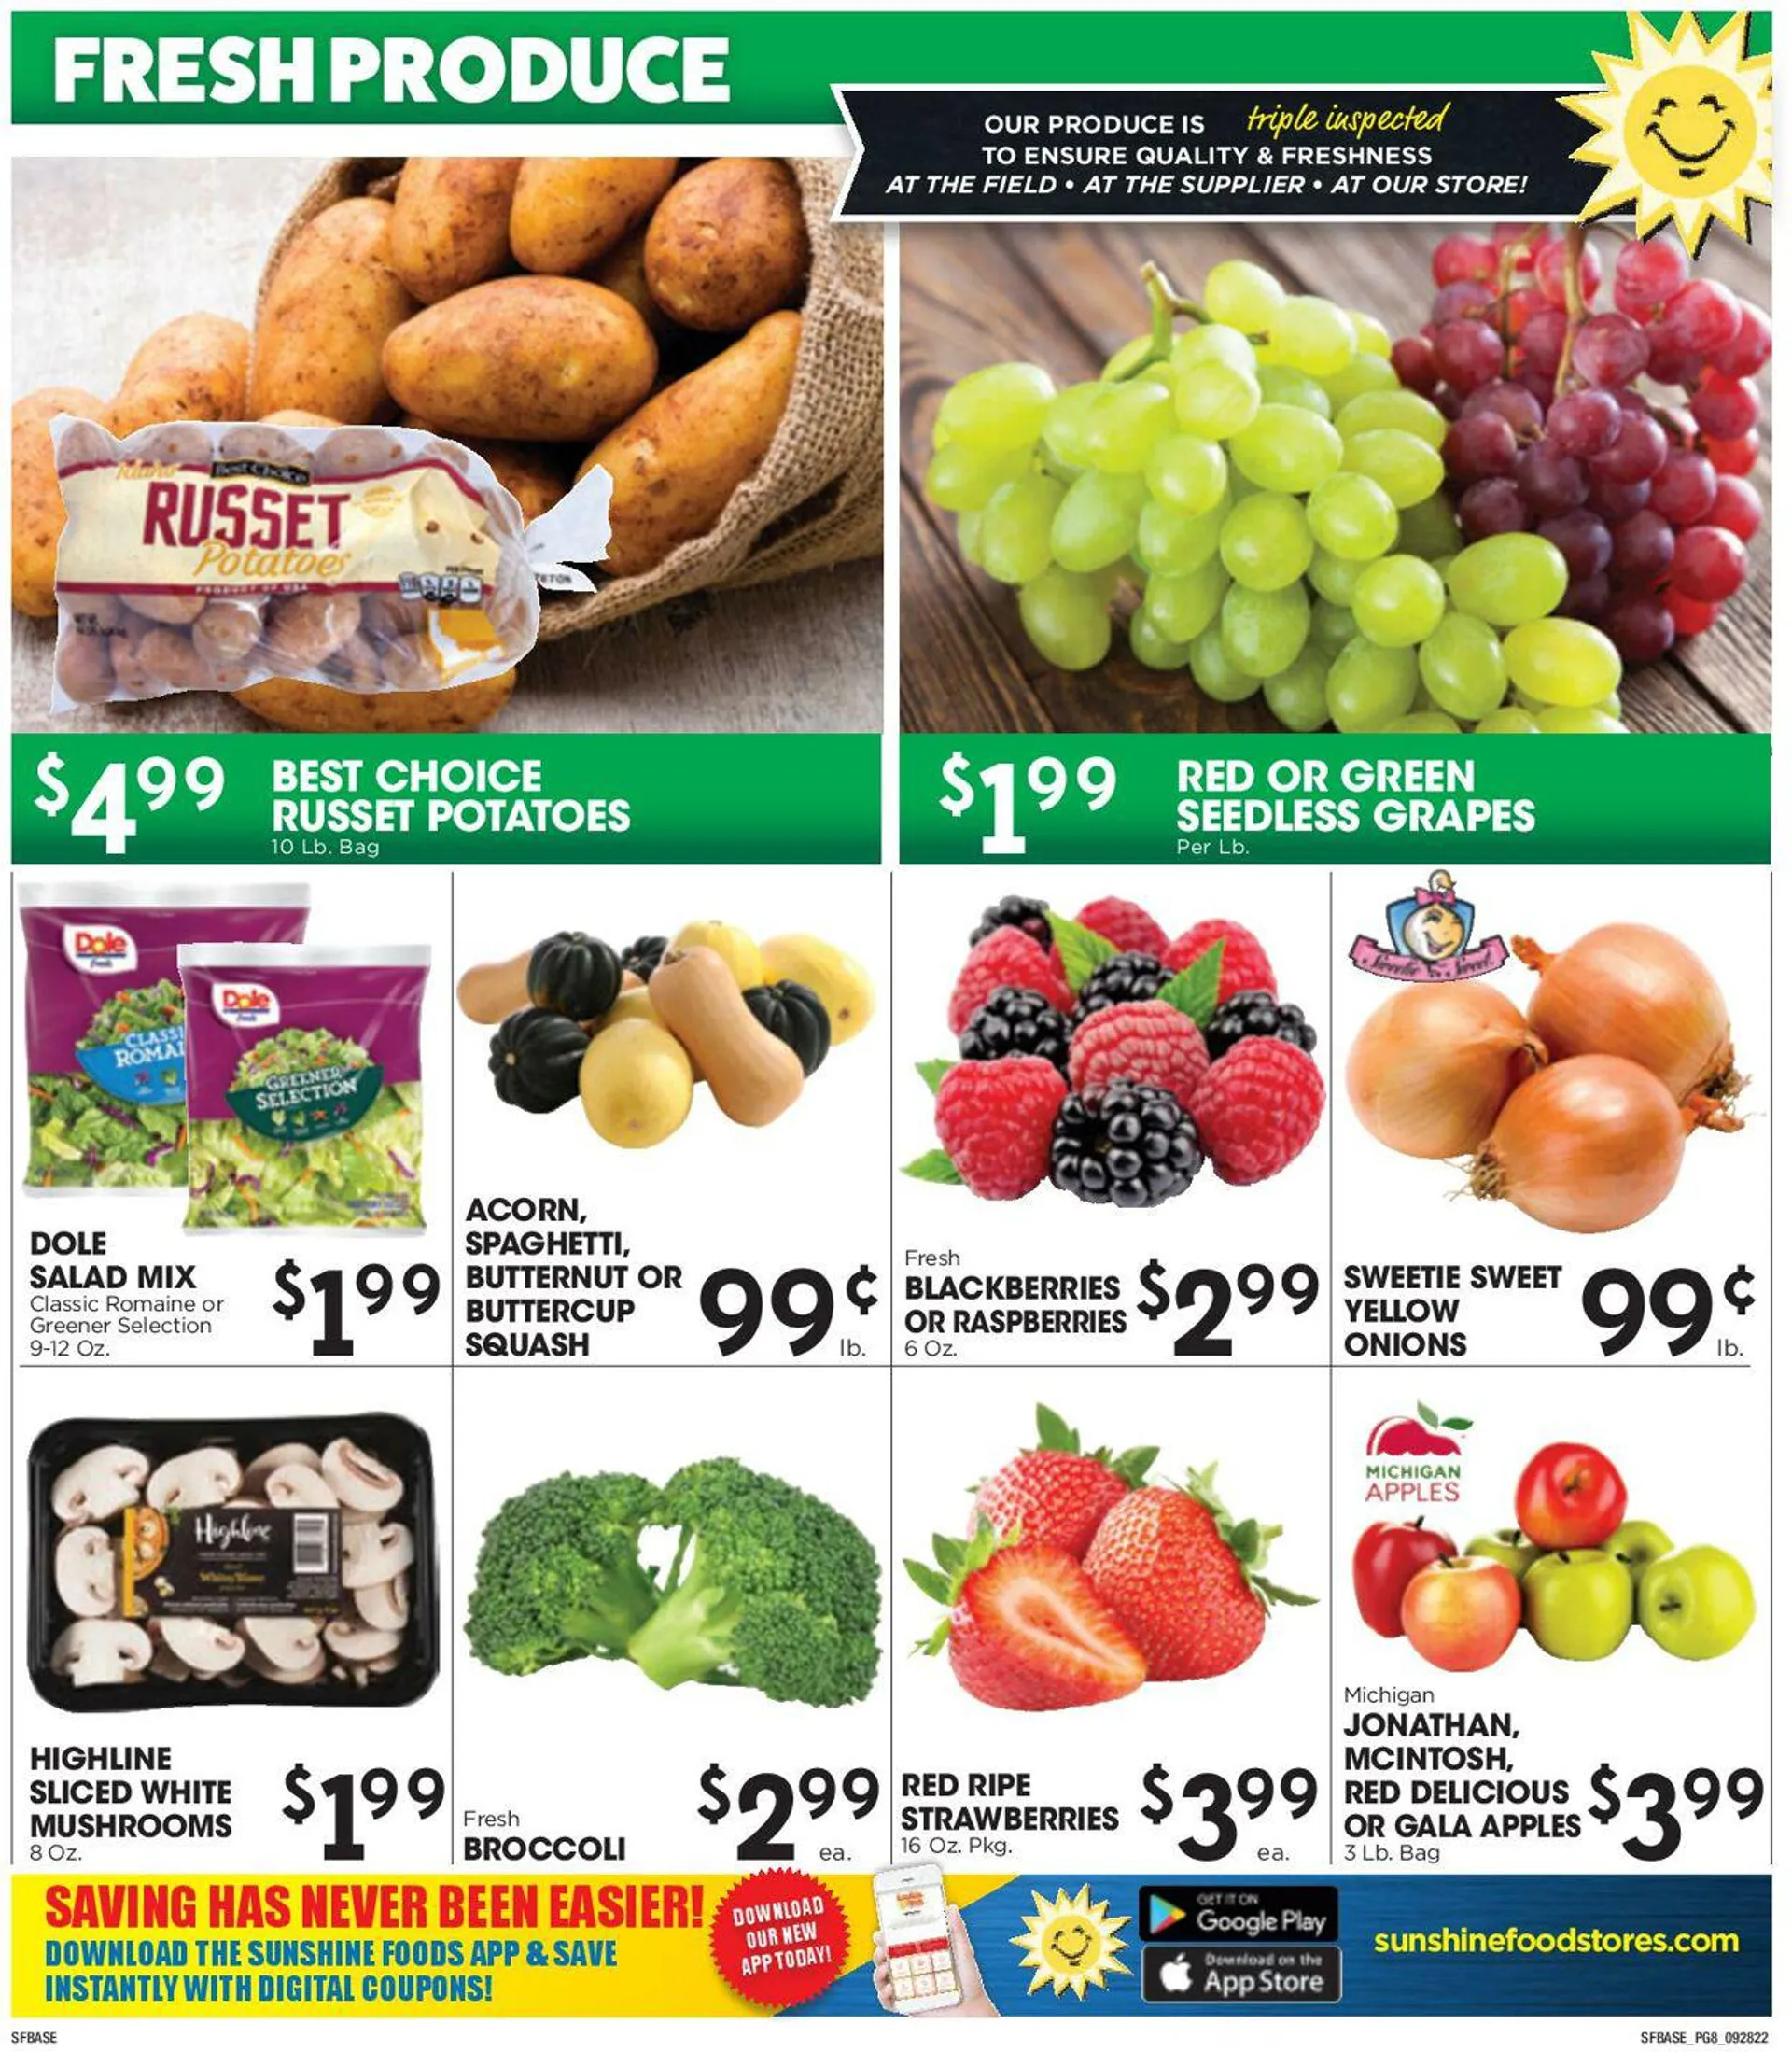 Sunshine Foods Current weekly ad - 8